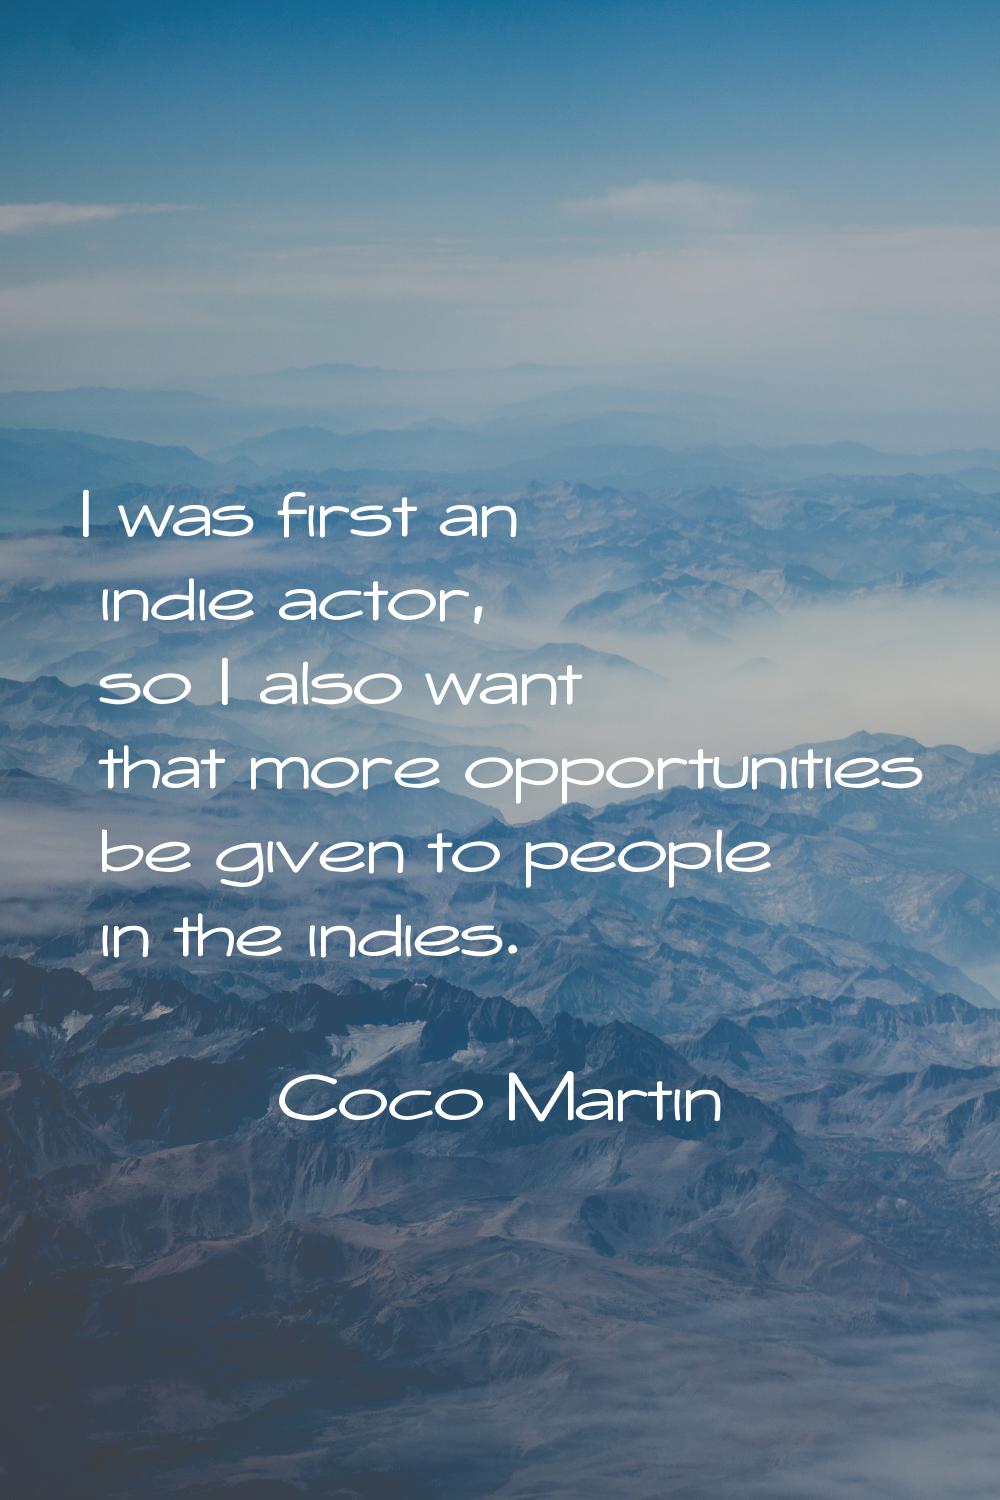 I was first an indie actor, so I also want that more opportunities be given to people in the indies